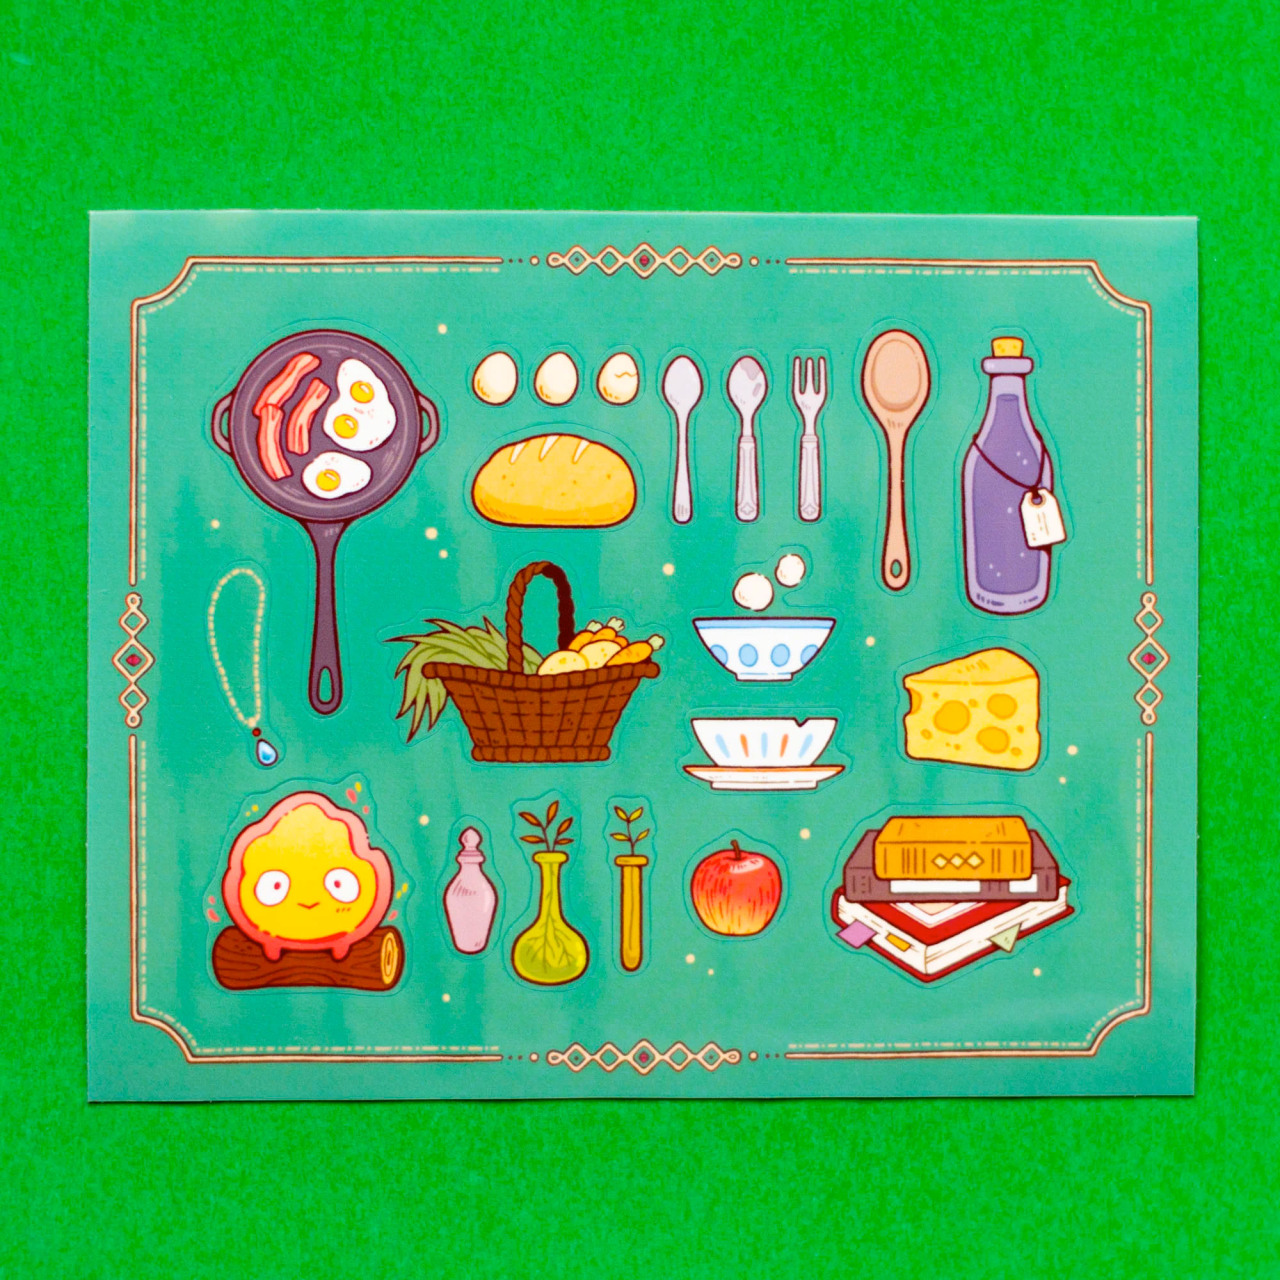 Sticker sheet depicting various items that might be found in Howl's moving castle, such as a happy Calcifer on a log, some books, potion bottles, and cooking utensils.